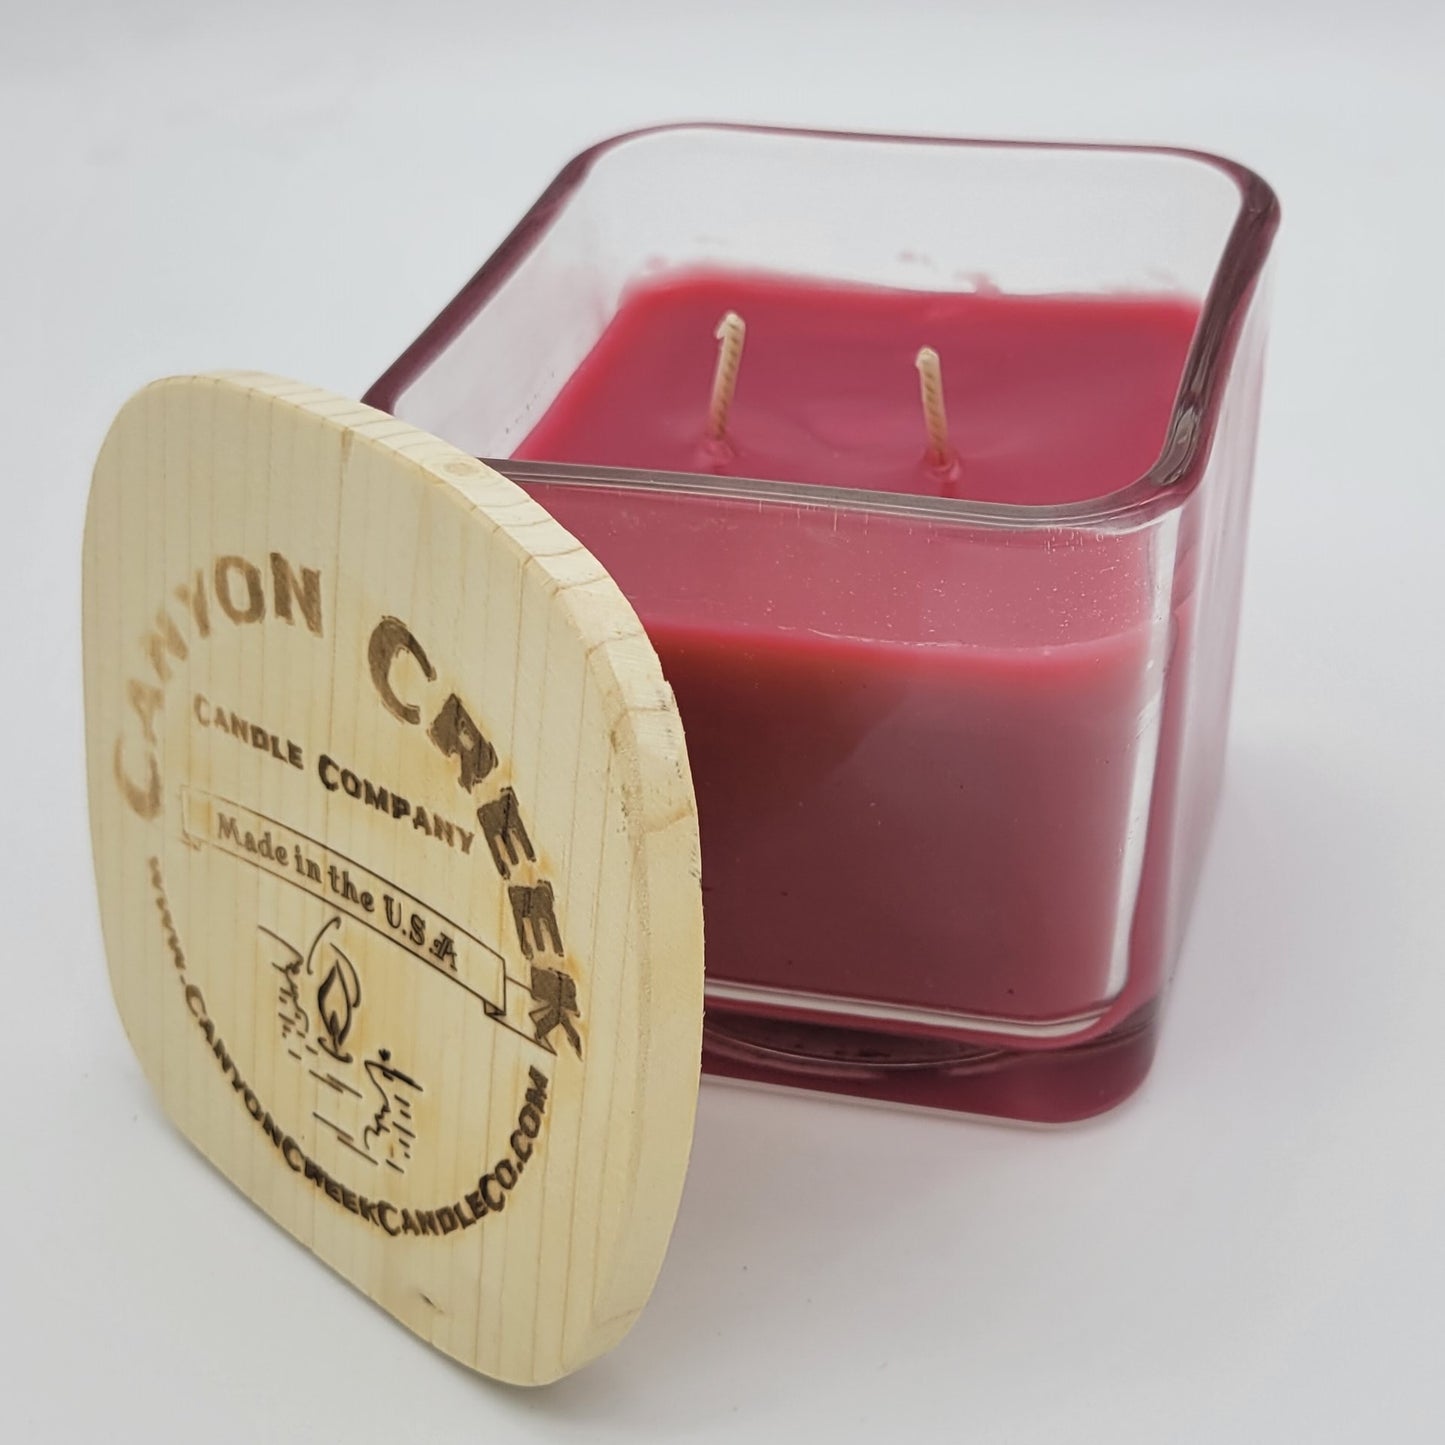 Mulberry 9oz jar candle